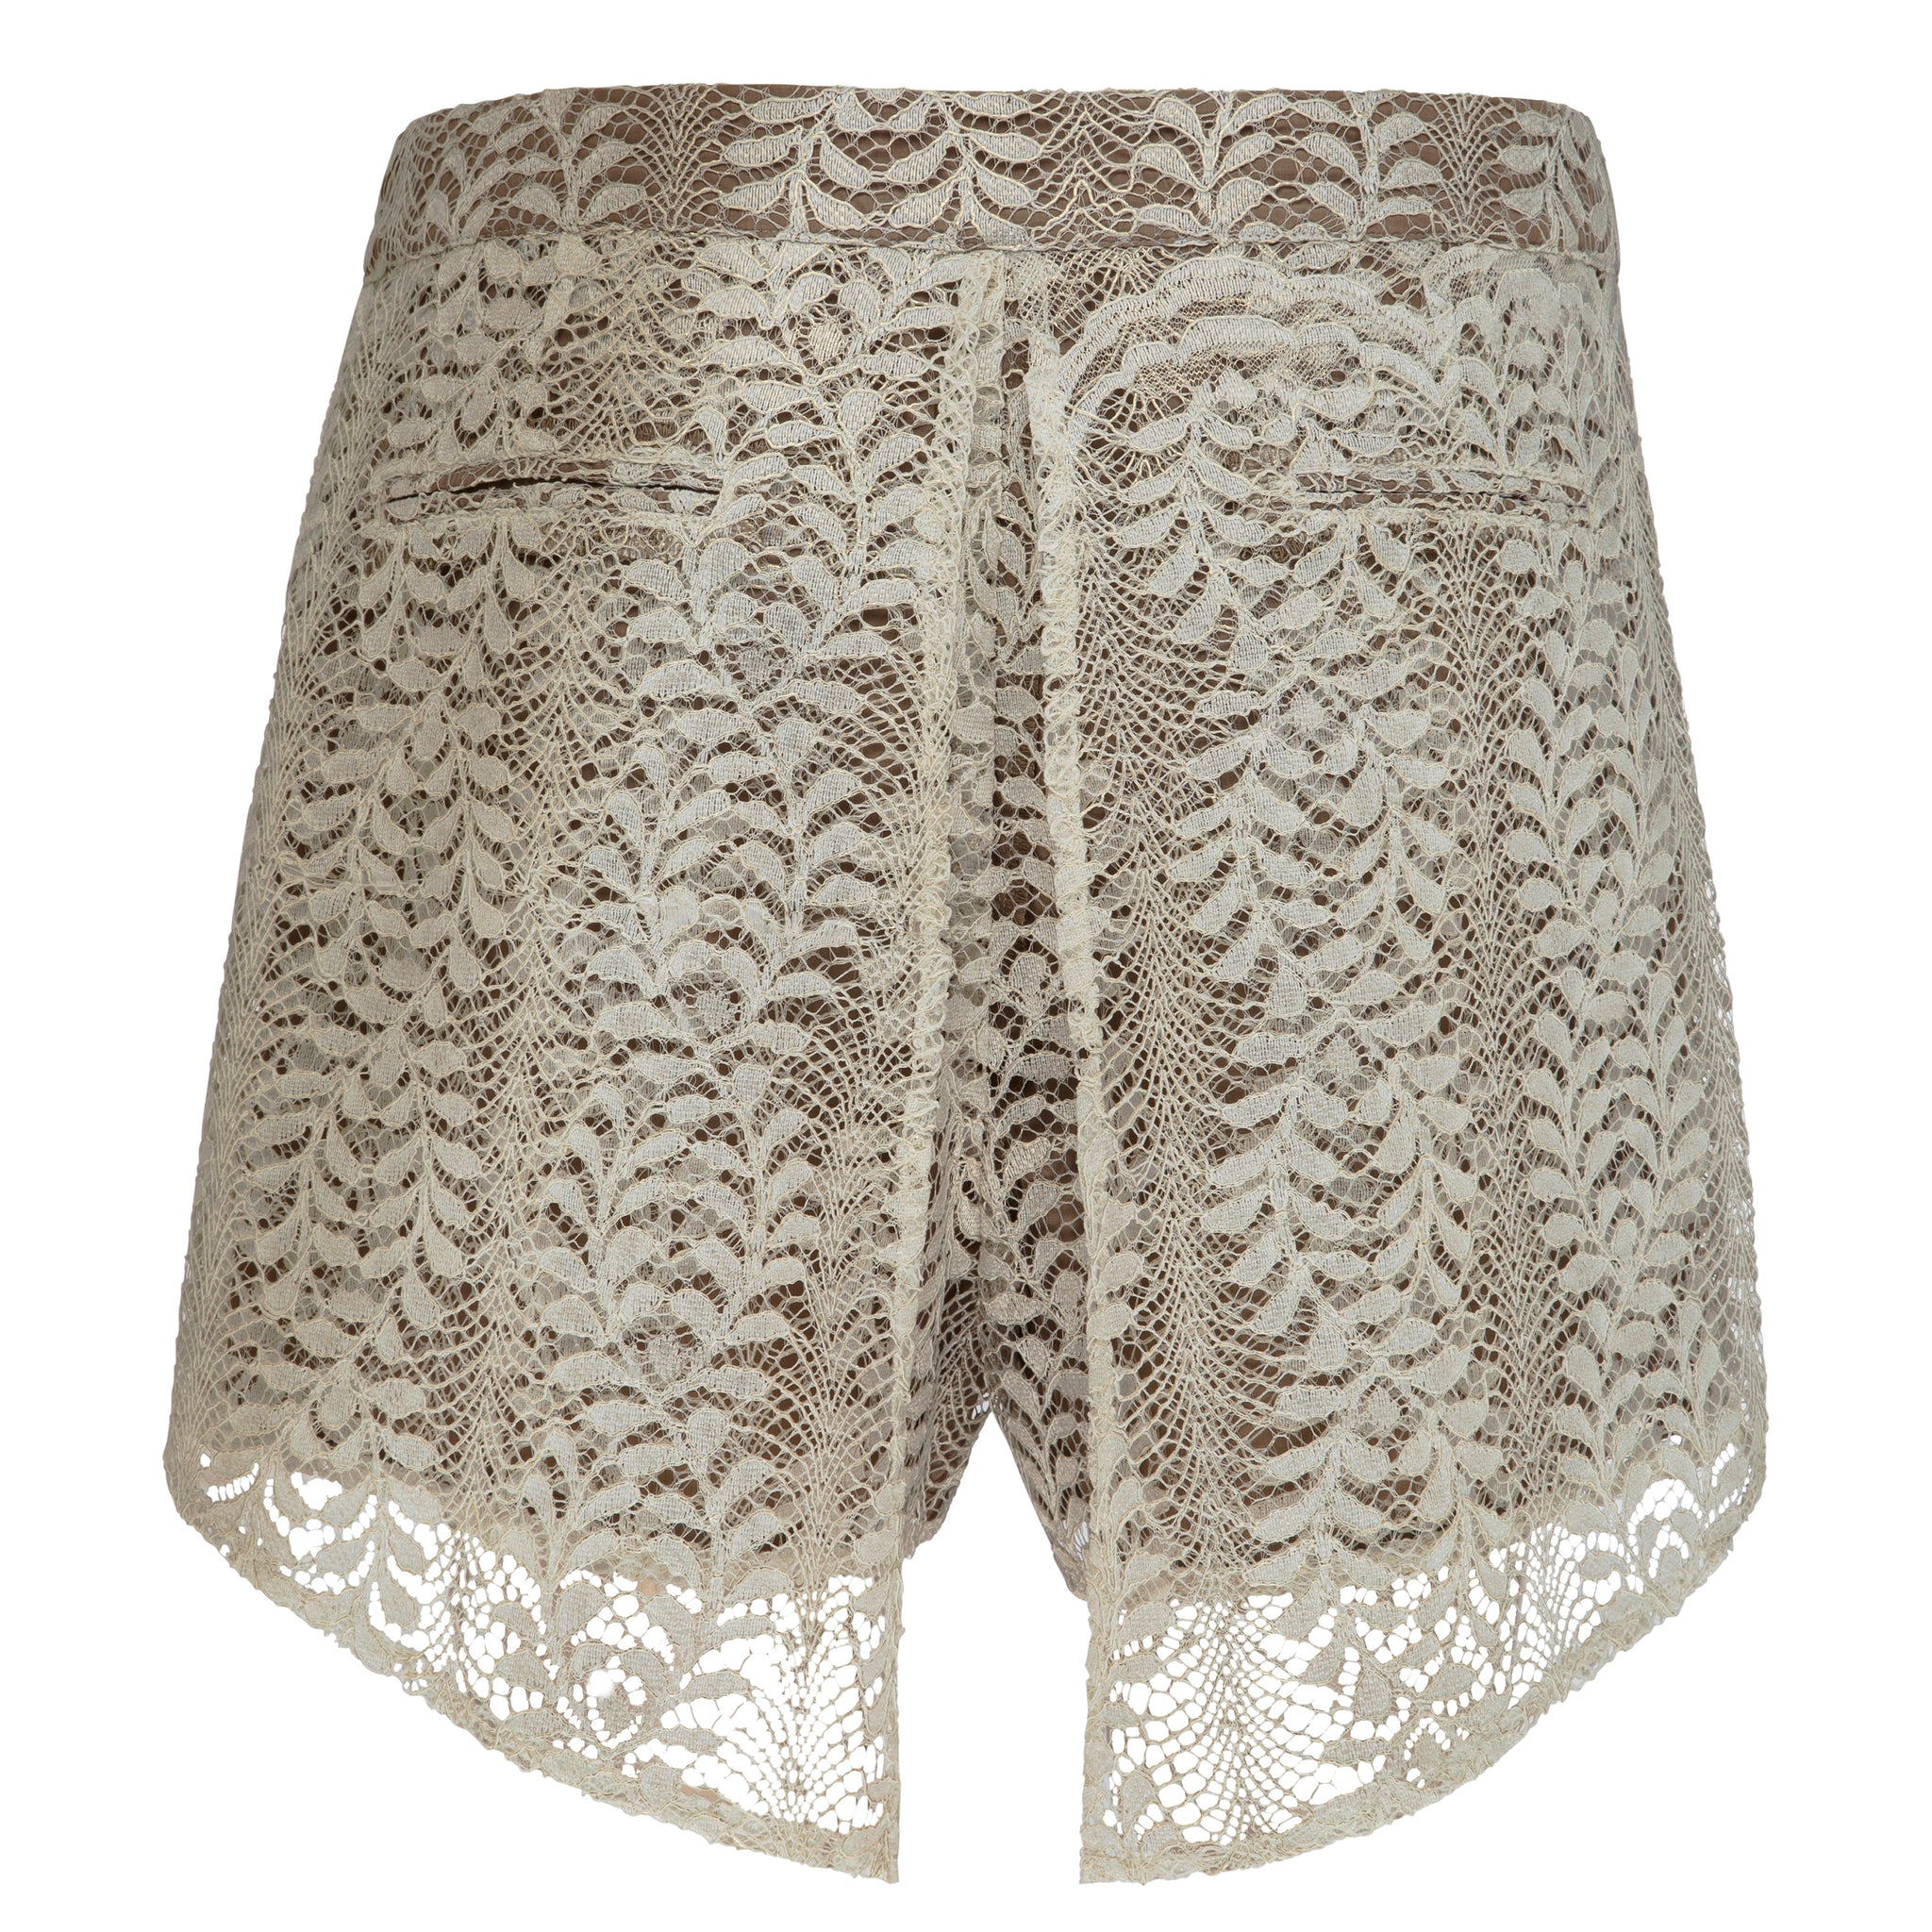 Atheia Short - Fine Lace with Gold Print